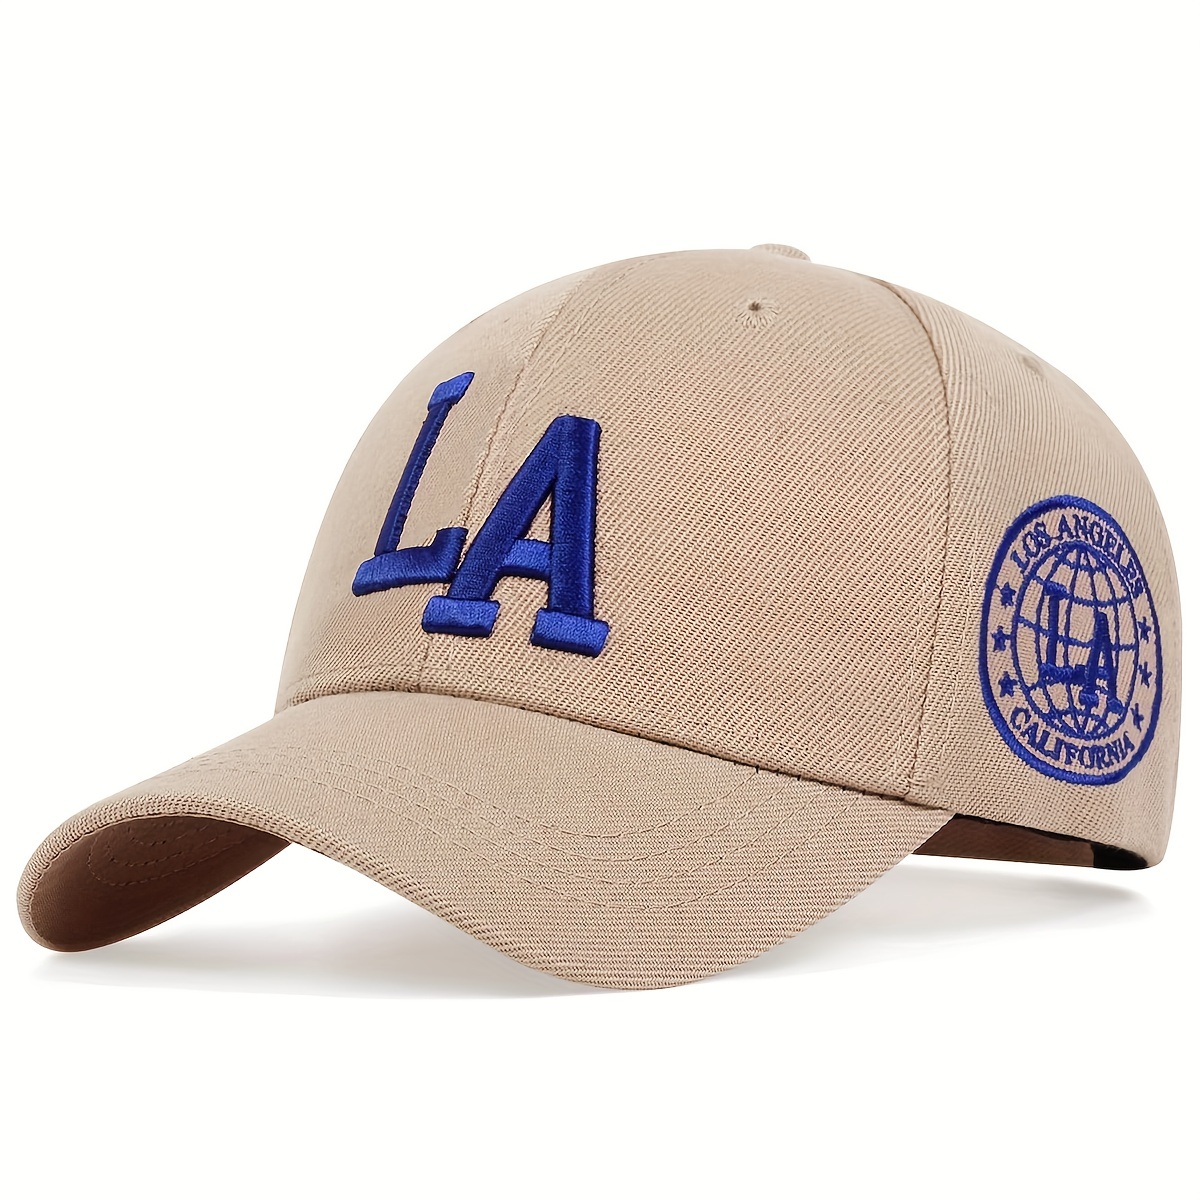 Los Angeles Embroidery Baseball Baseball Hat, Dad Hats unisex Casual Sports Sun Hats Solid Color Adjustable Dad Hat for Women & Men,Mens Hats and